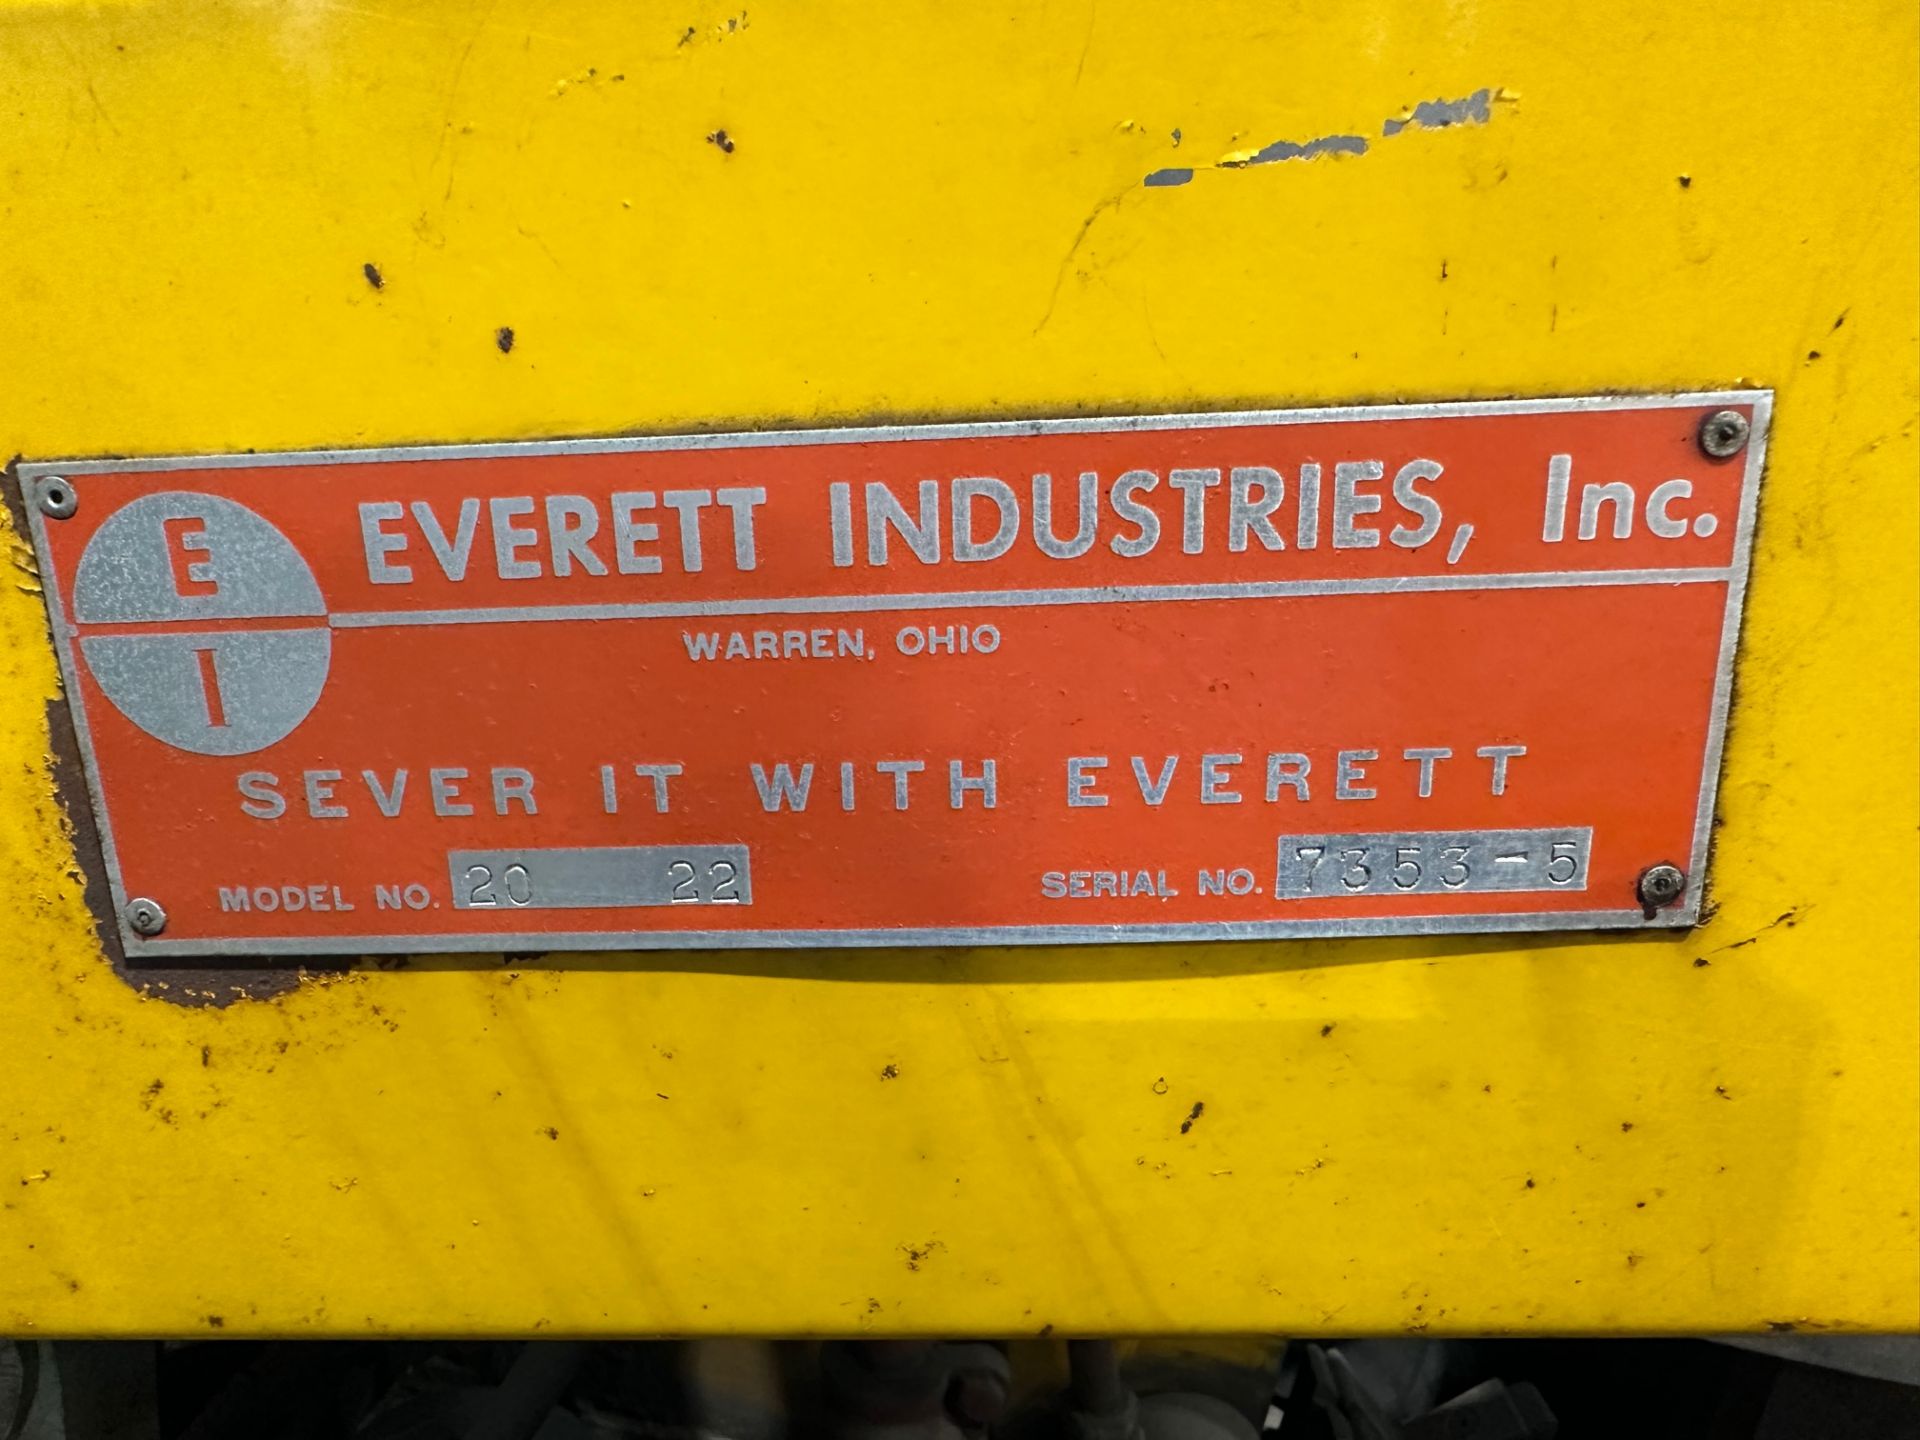 Everett Cold Shaft Saw / Model: 2022 / SN: 7353-5 / Capacity: 20" - Location, Montreal, Quebec - Image 4 of 6